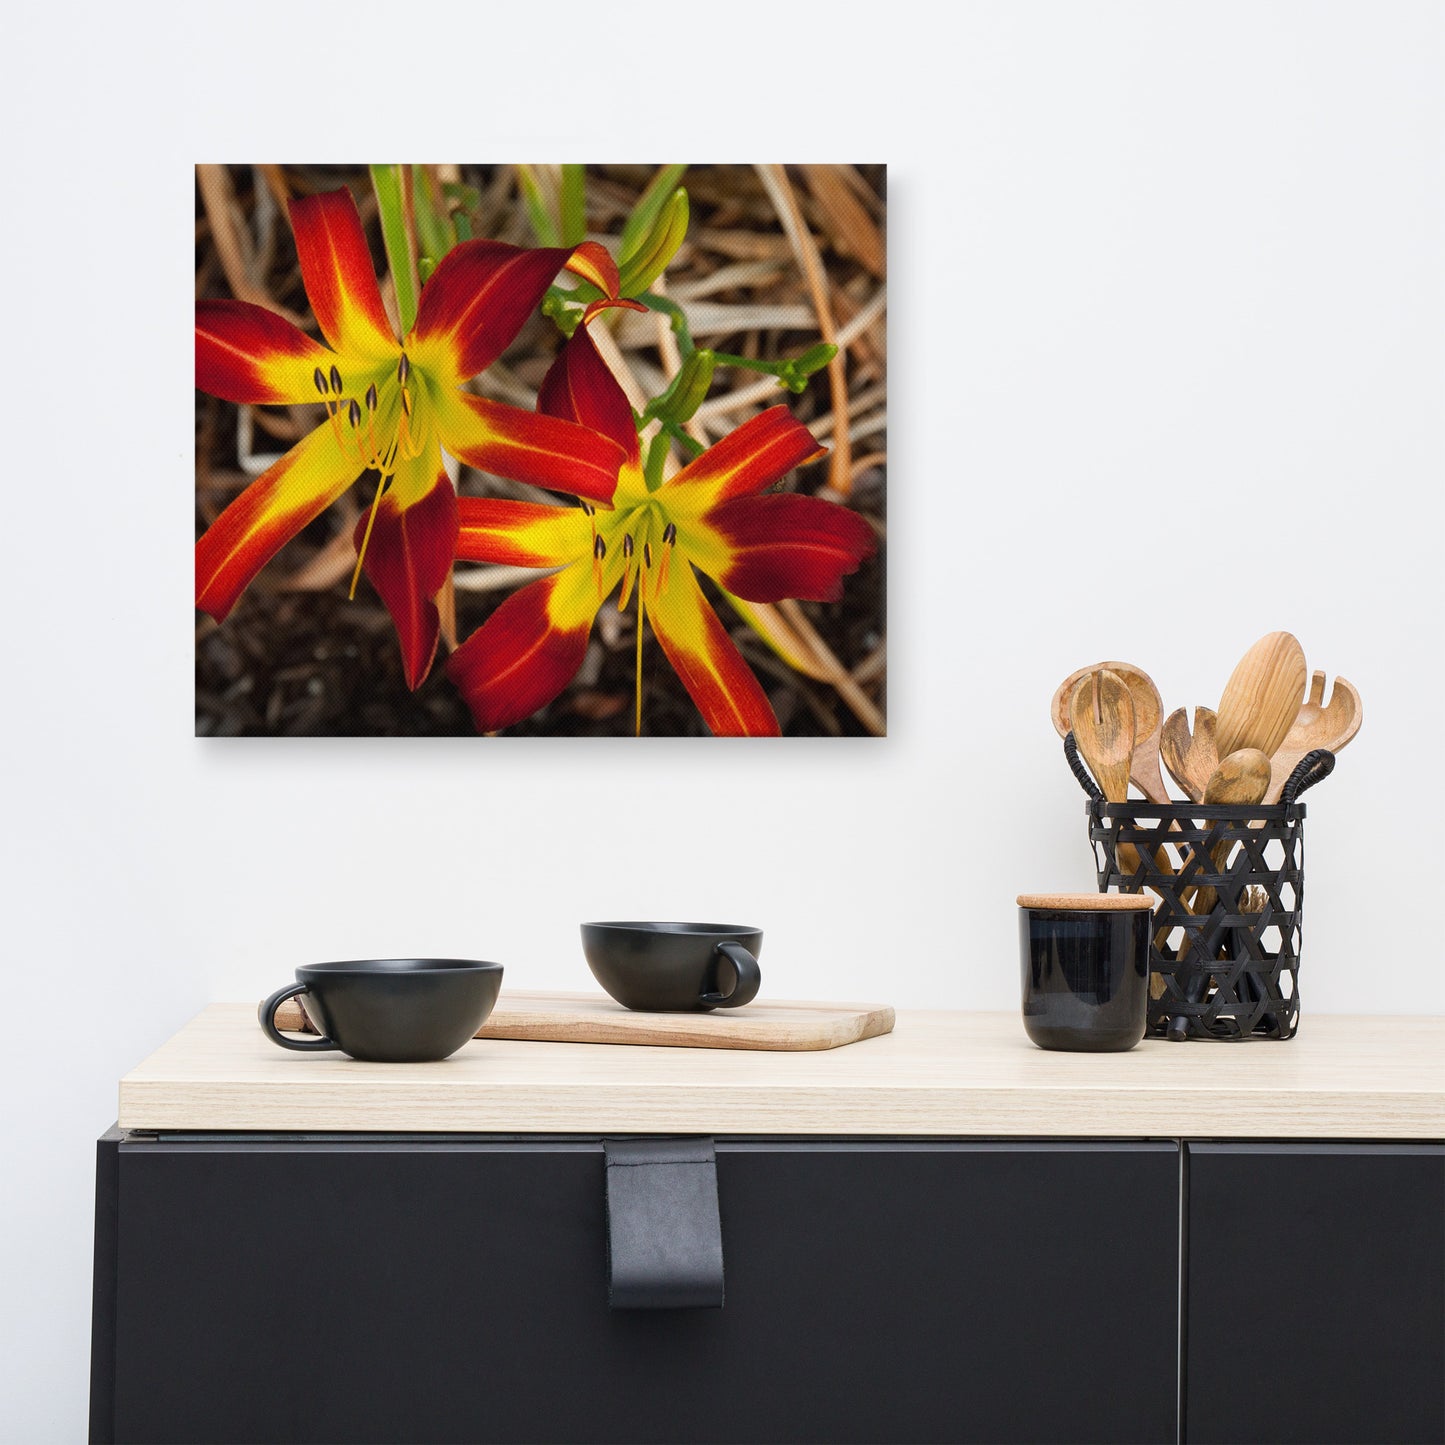 Royal Sunset Lily Floral Nature Canvas Wall Art Prints